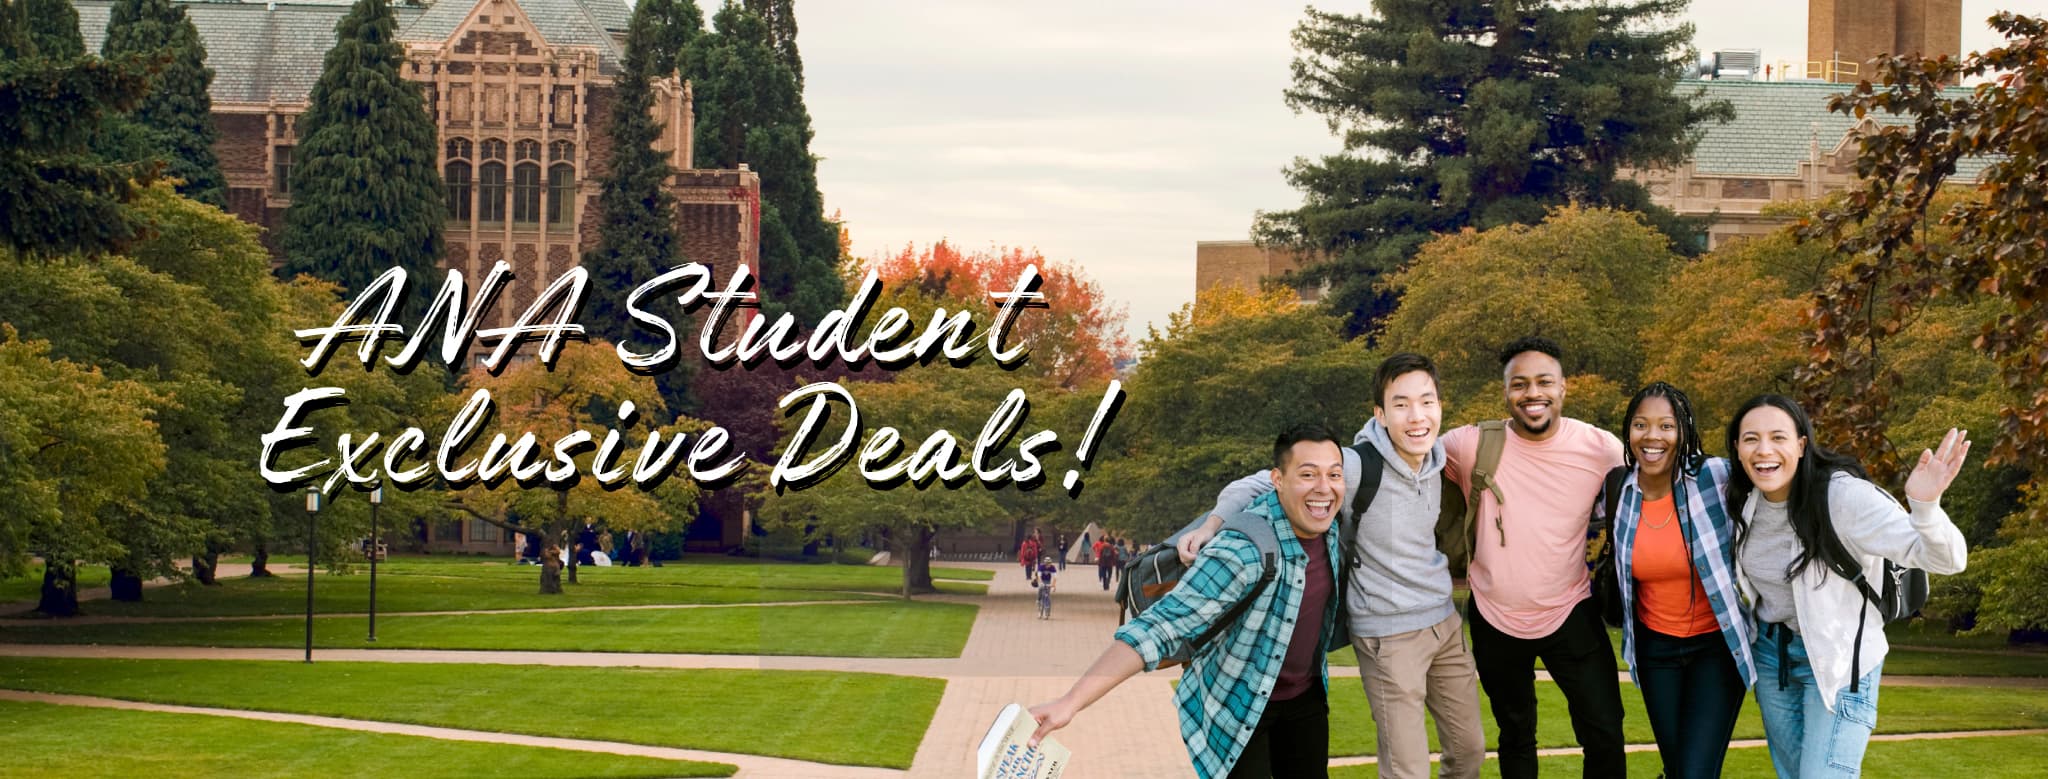 Join "ANA Student Exclusive Deals!" program and you will receive exclusive benefits.
Get started to receive your student privileges!